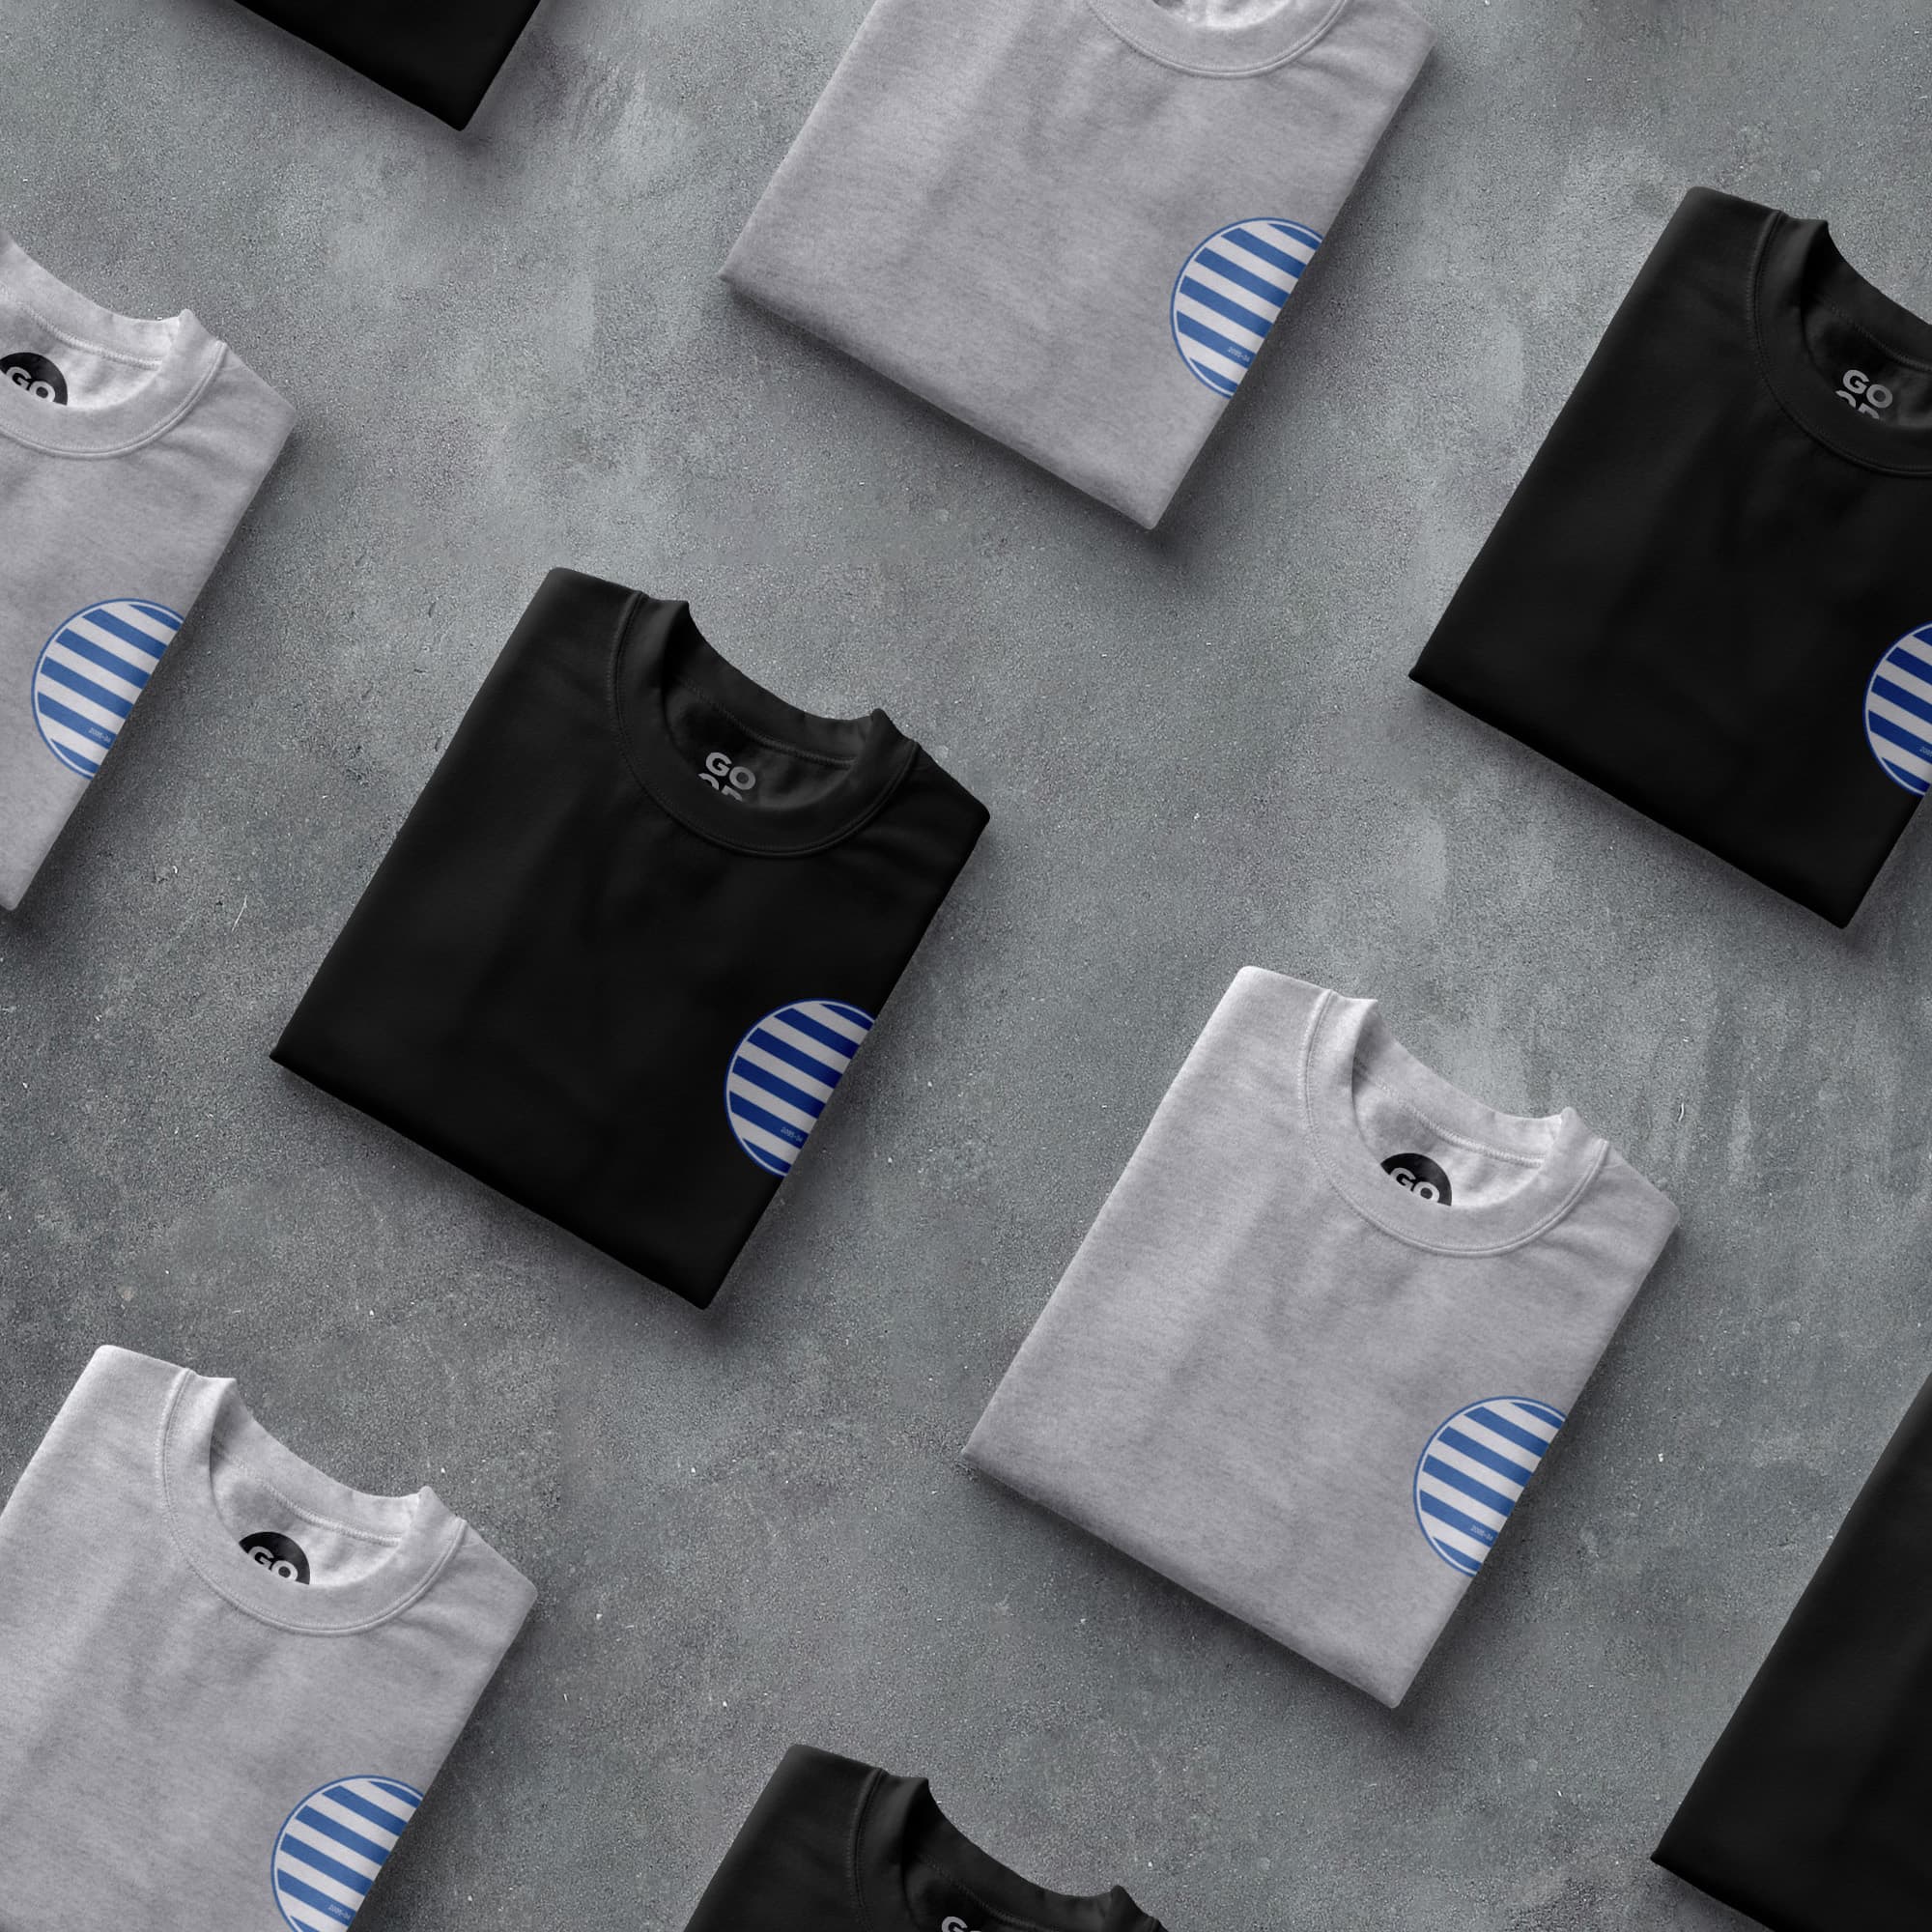 a group of black and white shirts with blue stripes